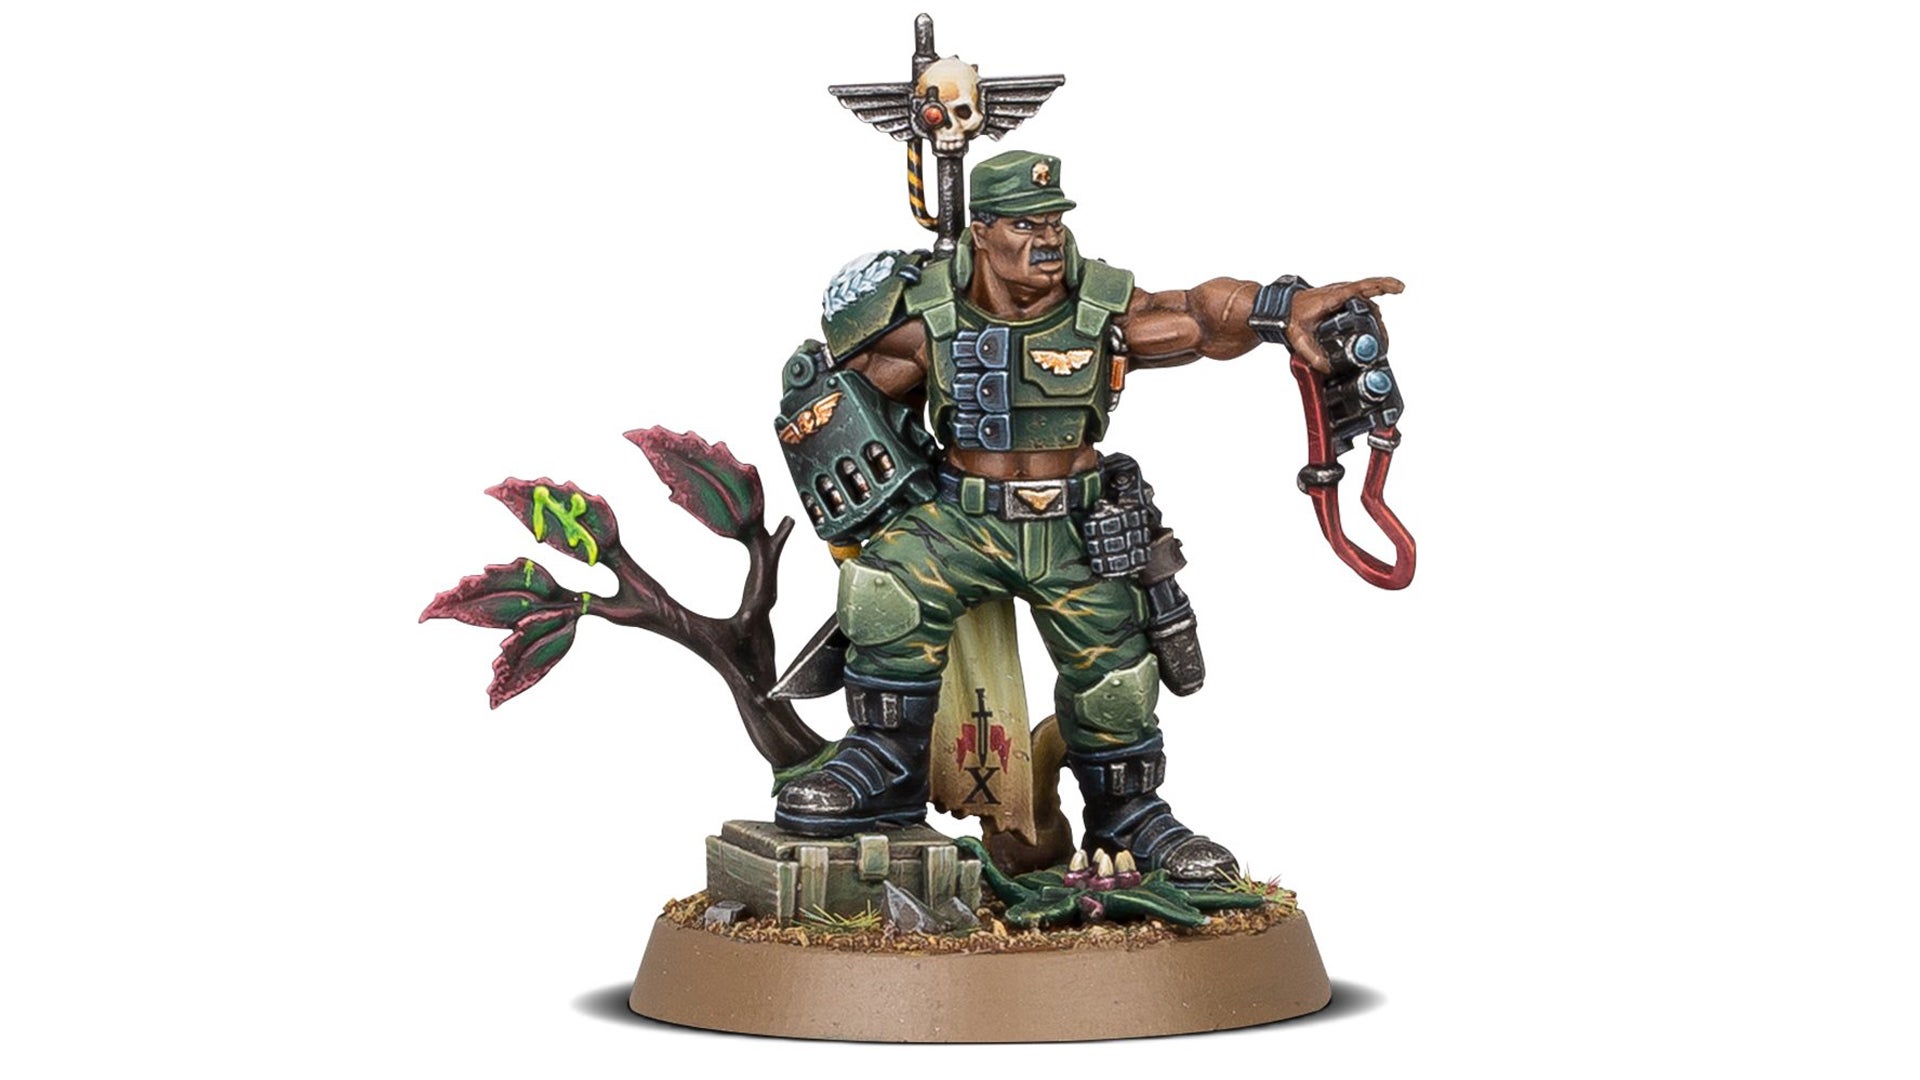 Image for Limited-edition Warhammer 40,000 miniature headed exclusively to local game stores in COVID-19 support effort